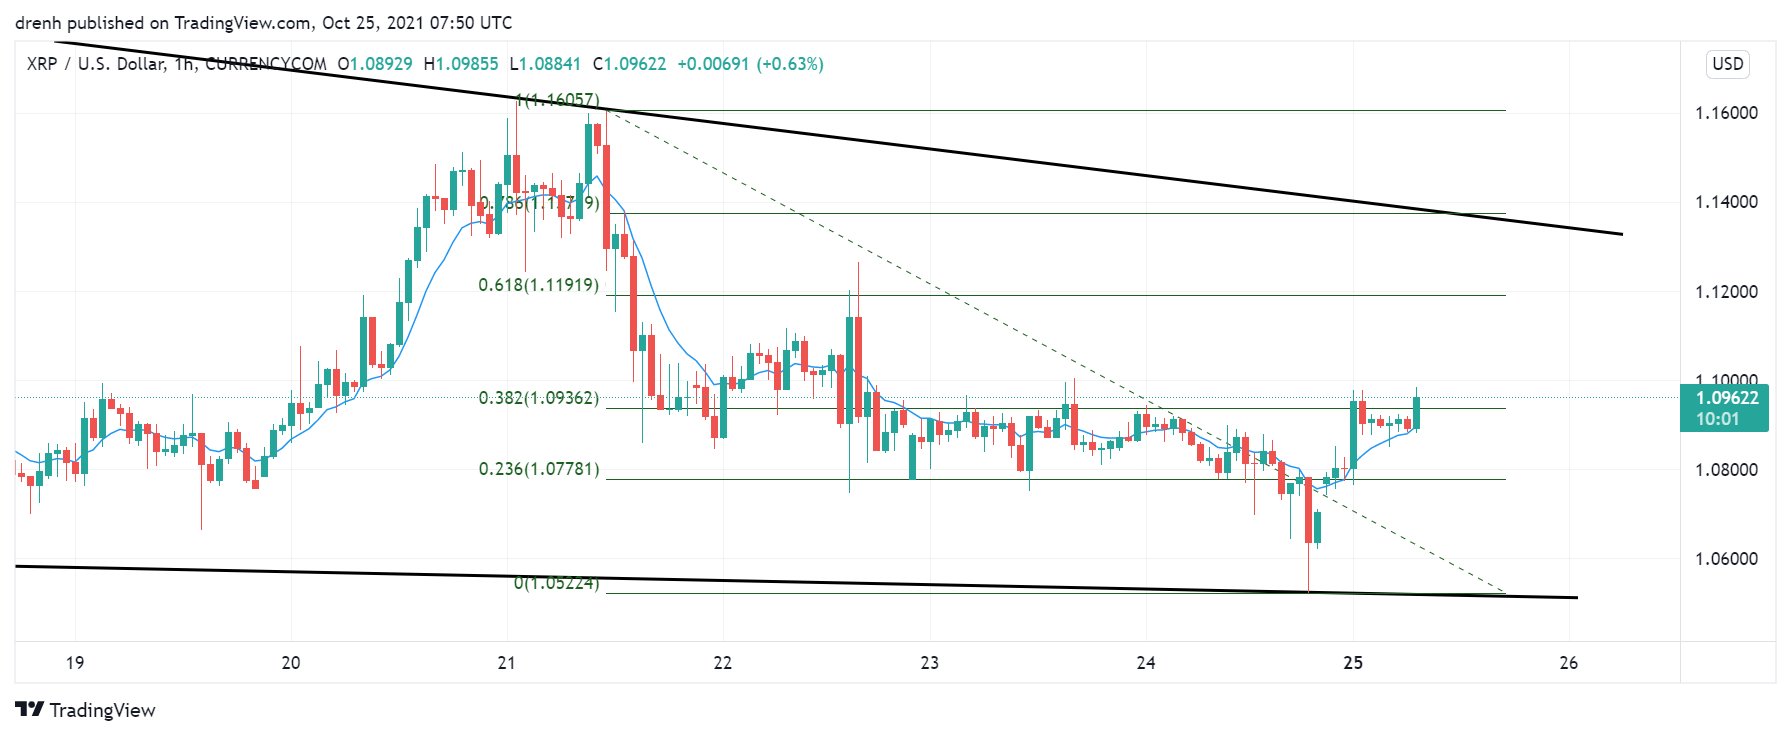 Fibonacci retracement levels for XRP in a 1-hour chart